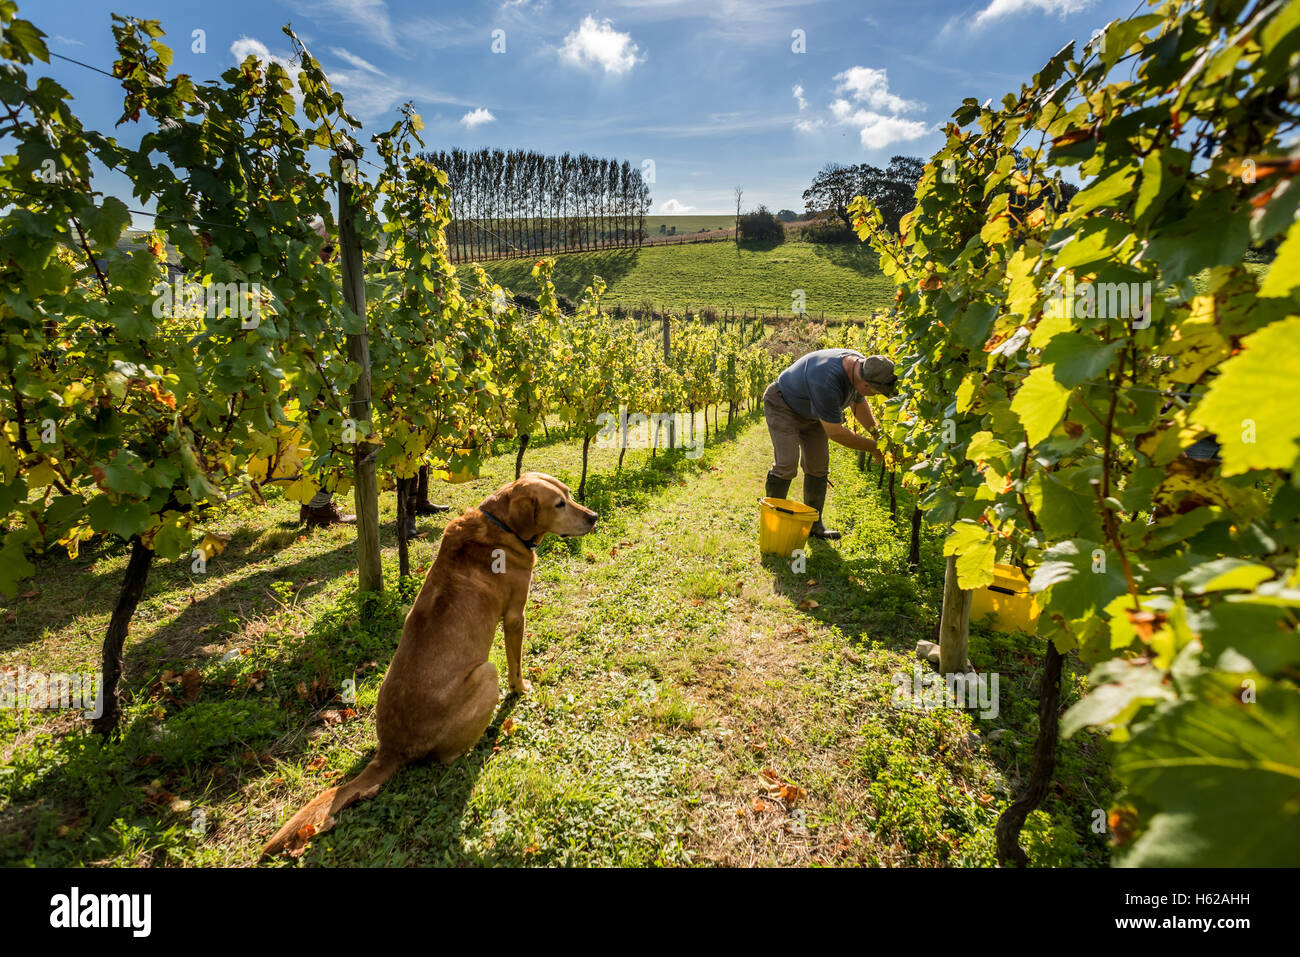 Edmund Limerick, a volunteer grape-picker at the Breaky Bottom vineyard, near Lewes in East Sussex, with his dog Redmund. Englis Stock Photo